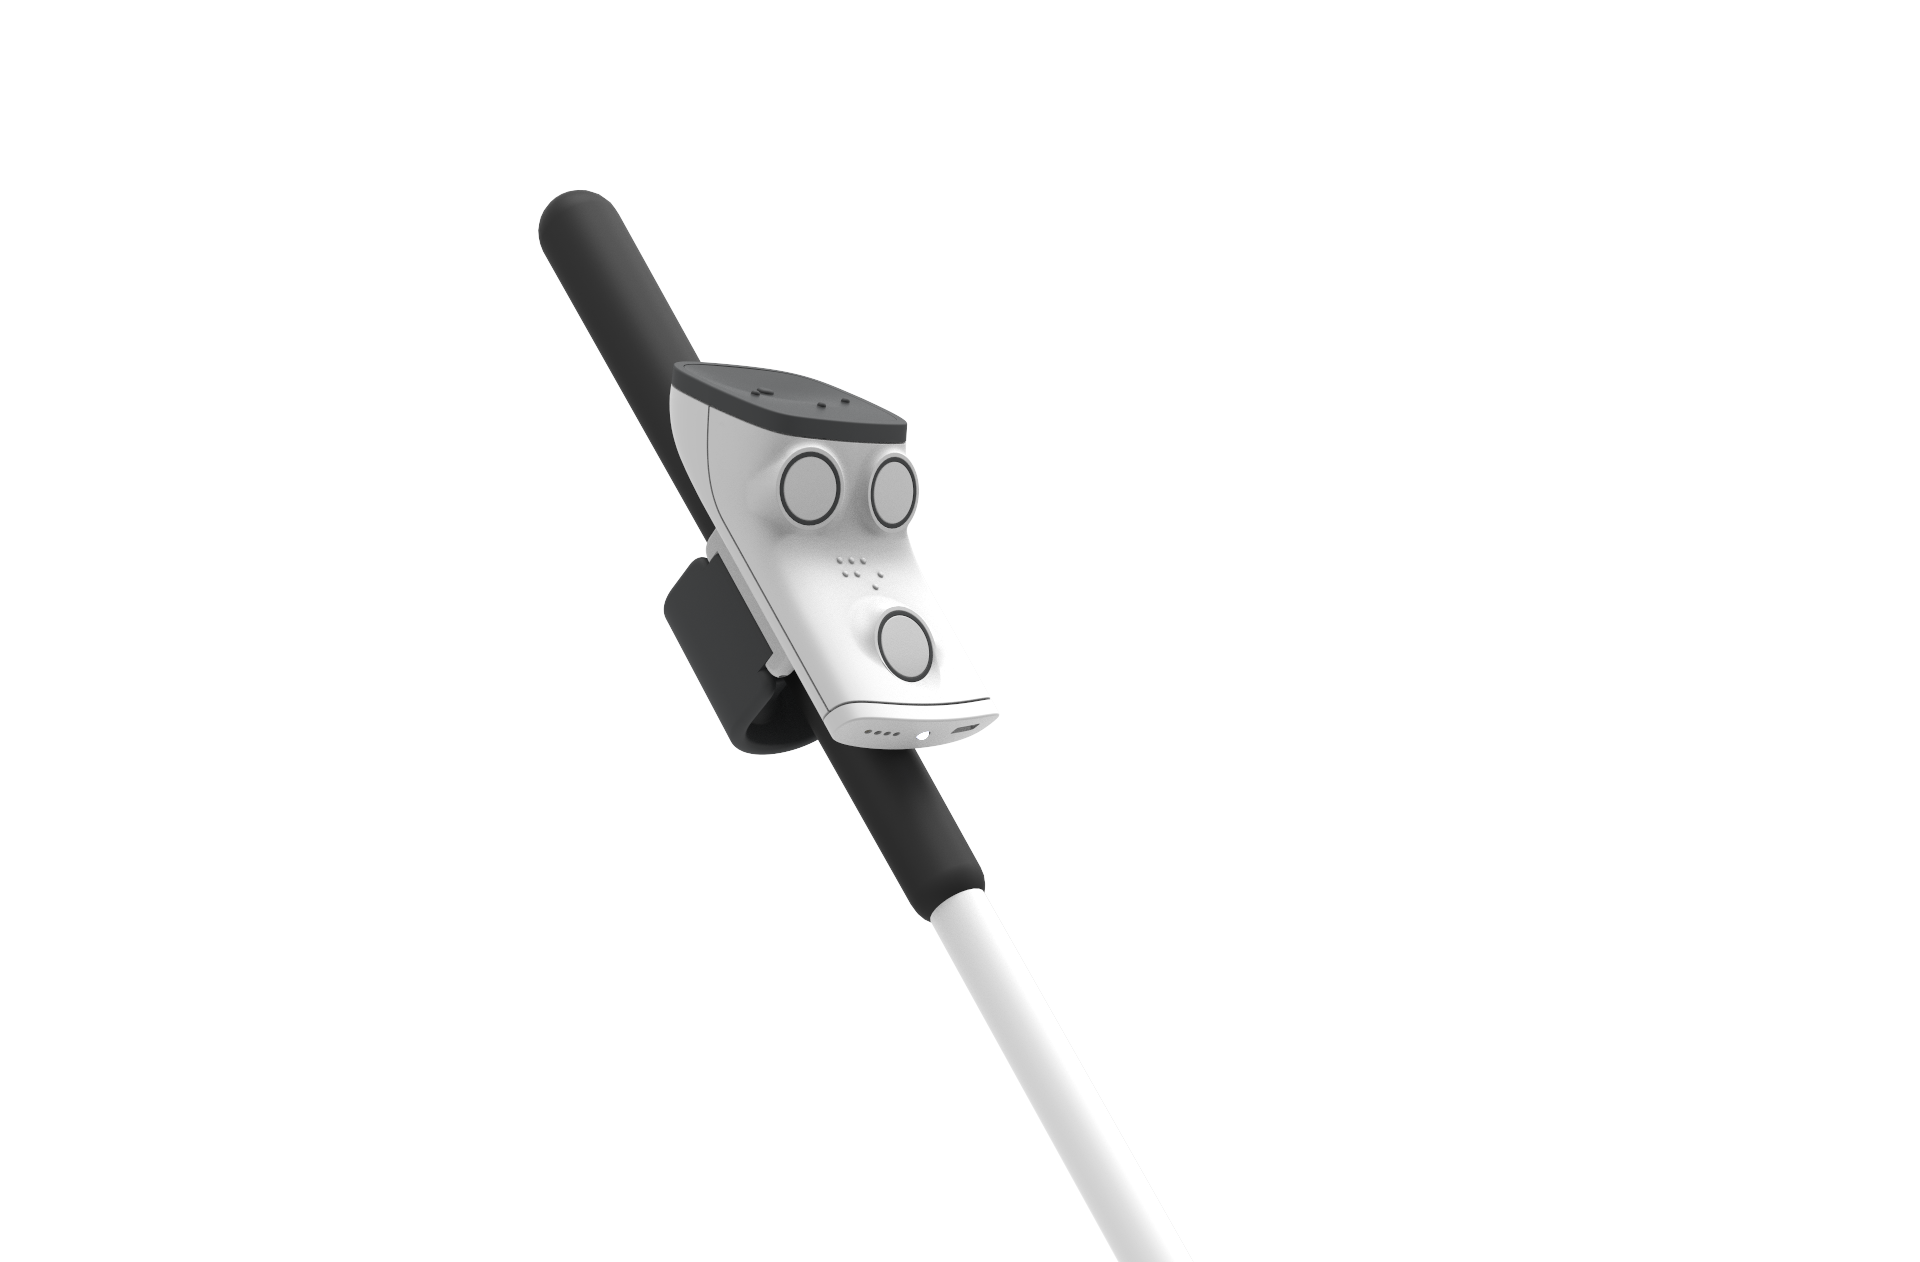 Image shows the GoSence Rango obstacle detection device attached to a cane